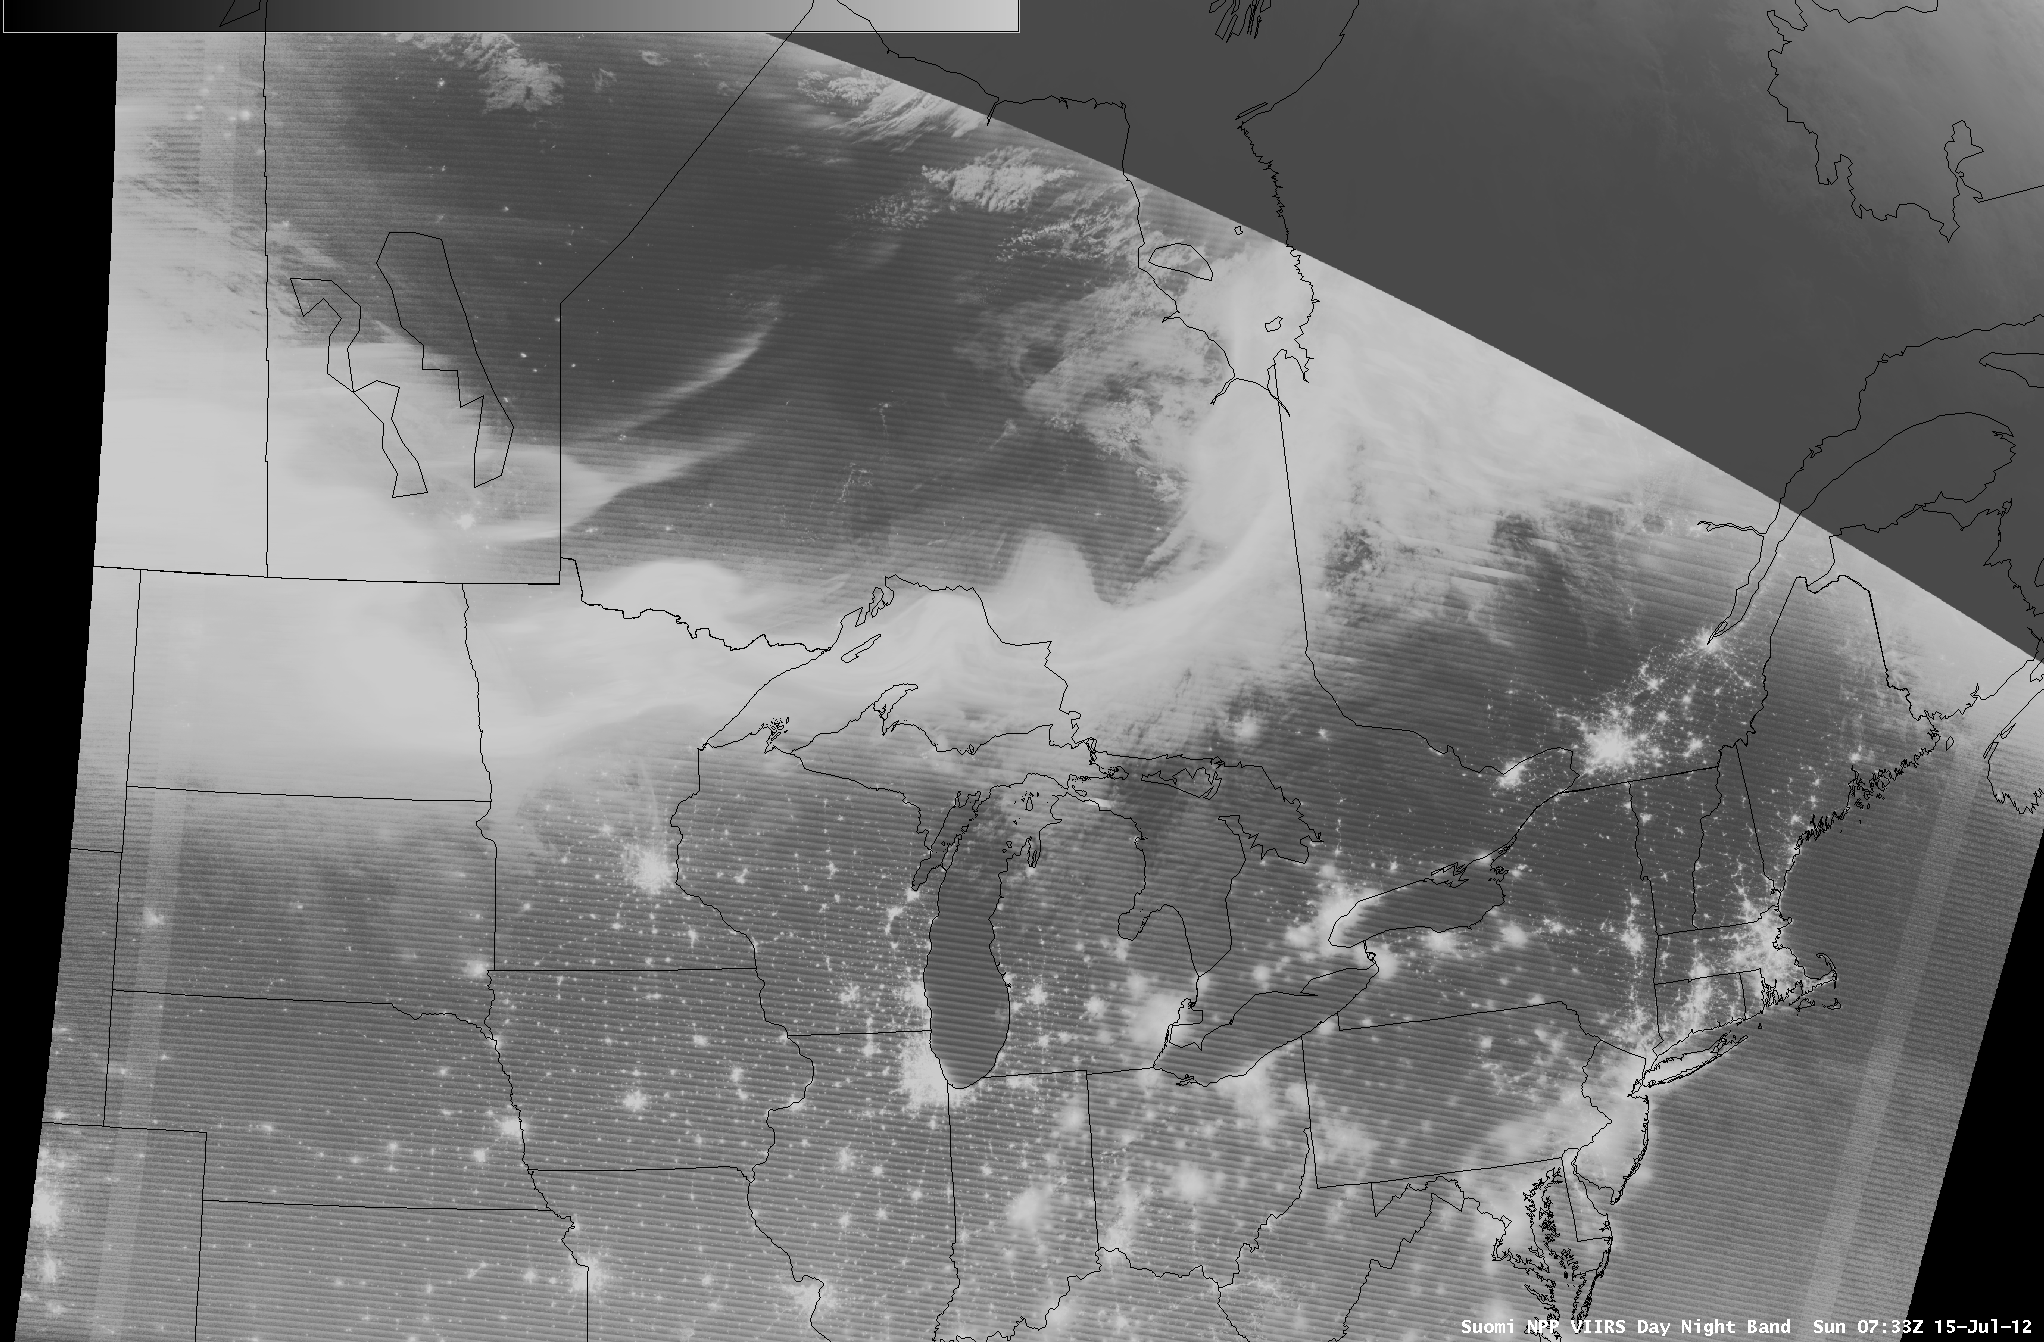 Suomi NPP VIIRS 0.7 Âµm Day/Night Band images (15 and 16 July)